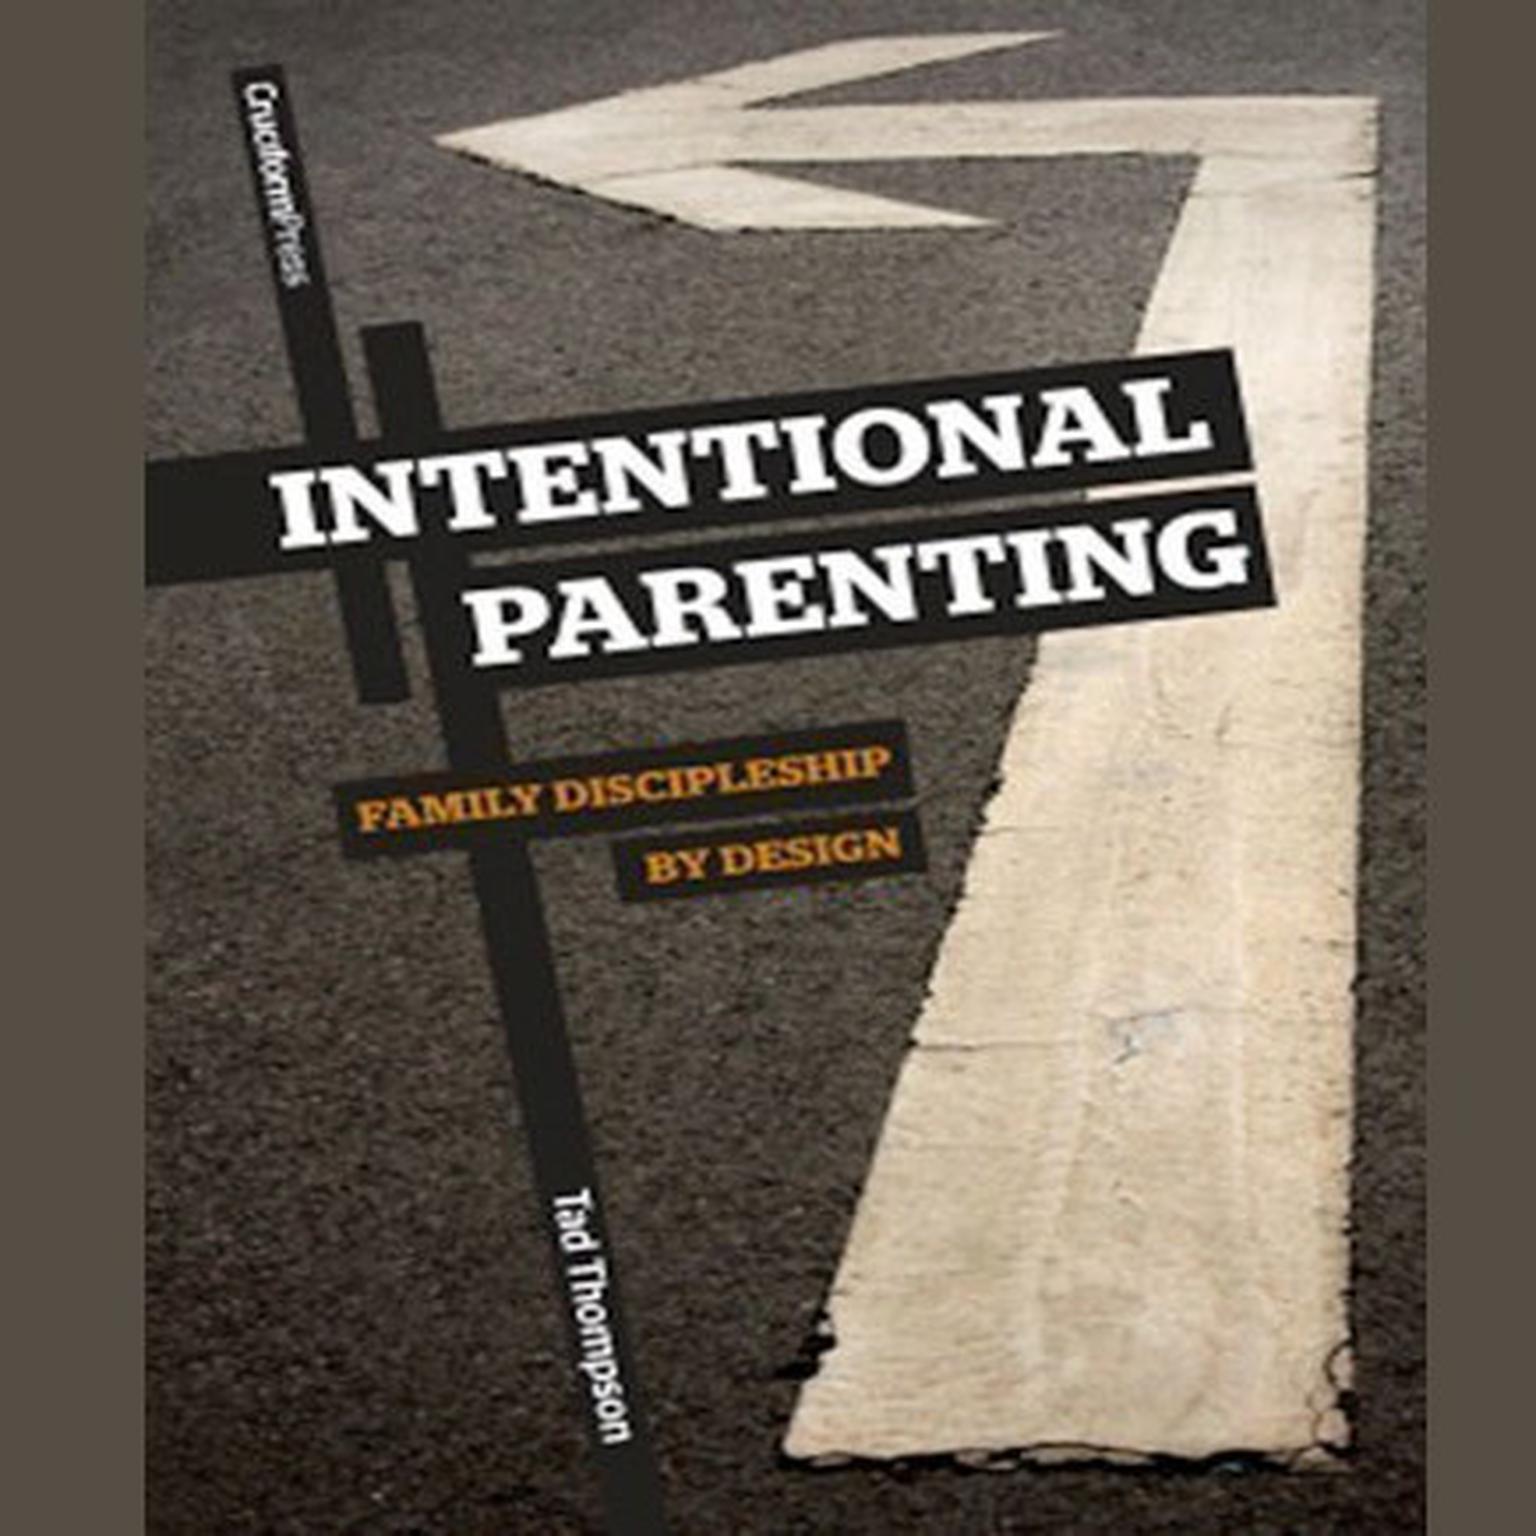 Intentional Parenting: Family Discipleship by Design Audiobook, by Tad Thompson